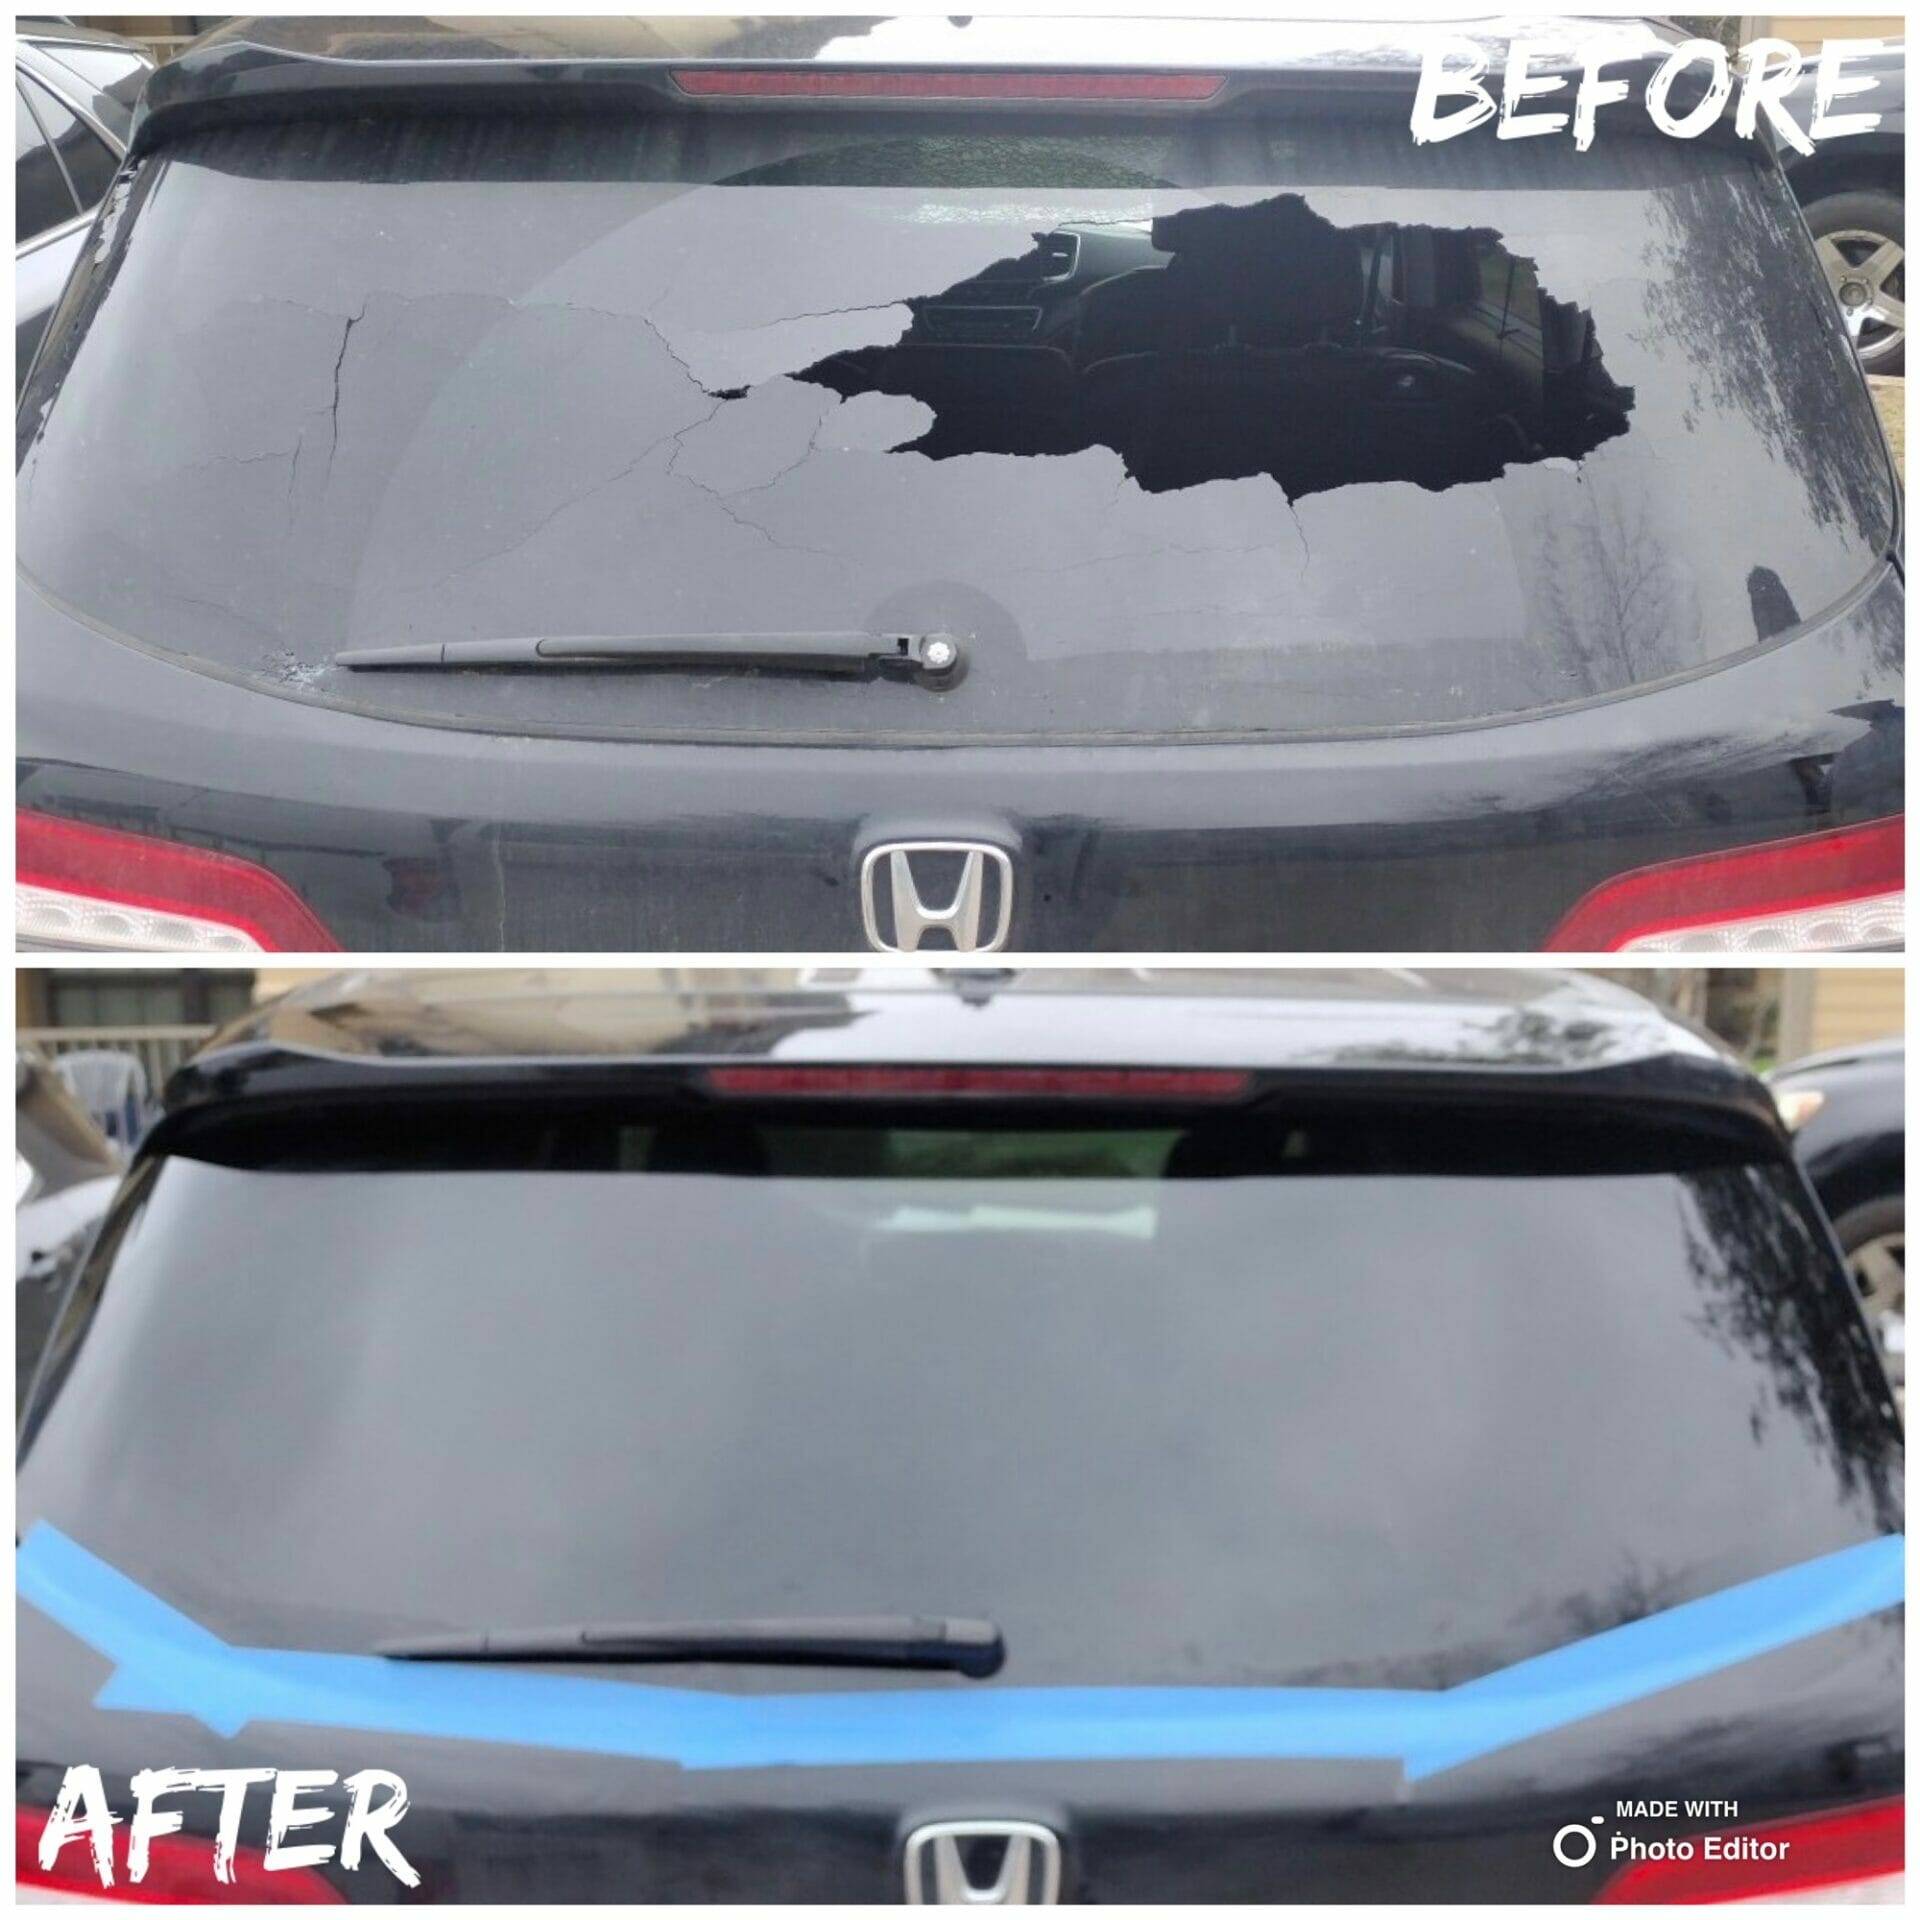 This before and after image highlights the successful repair of a Honda SUV's rear windshield in Live Oak, Texas. The top half features the damaged back glass with the entire center smashed in due to vandalism. The bottom half presents the SUV after the repair, fitted with a new, clear, and intact back glass, emphasizing the quality and effectiveness of our windshield replacement service in the Live Oak area.